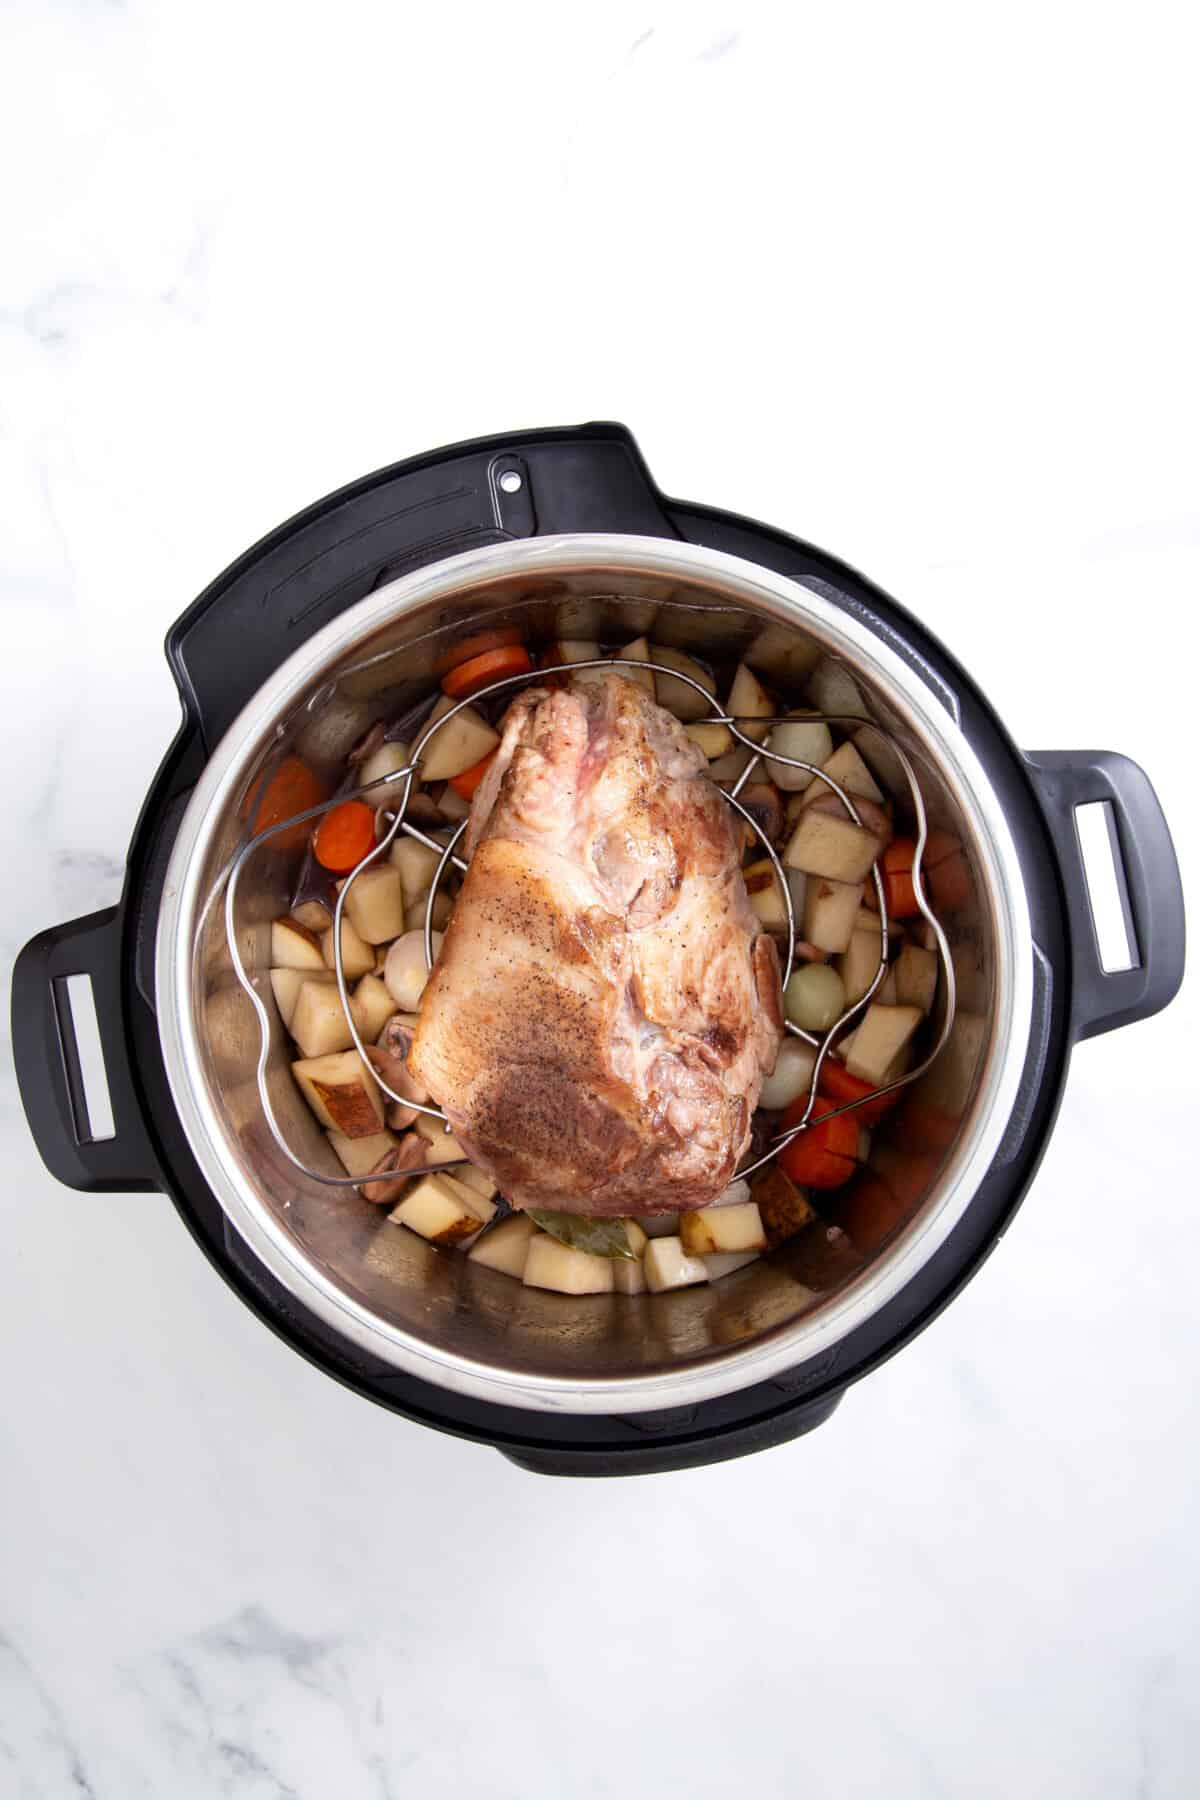 step 3 to make instant pot pork roast, place the pork roast on top of the veggies and pressure cook.